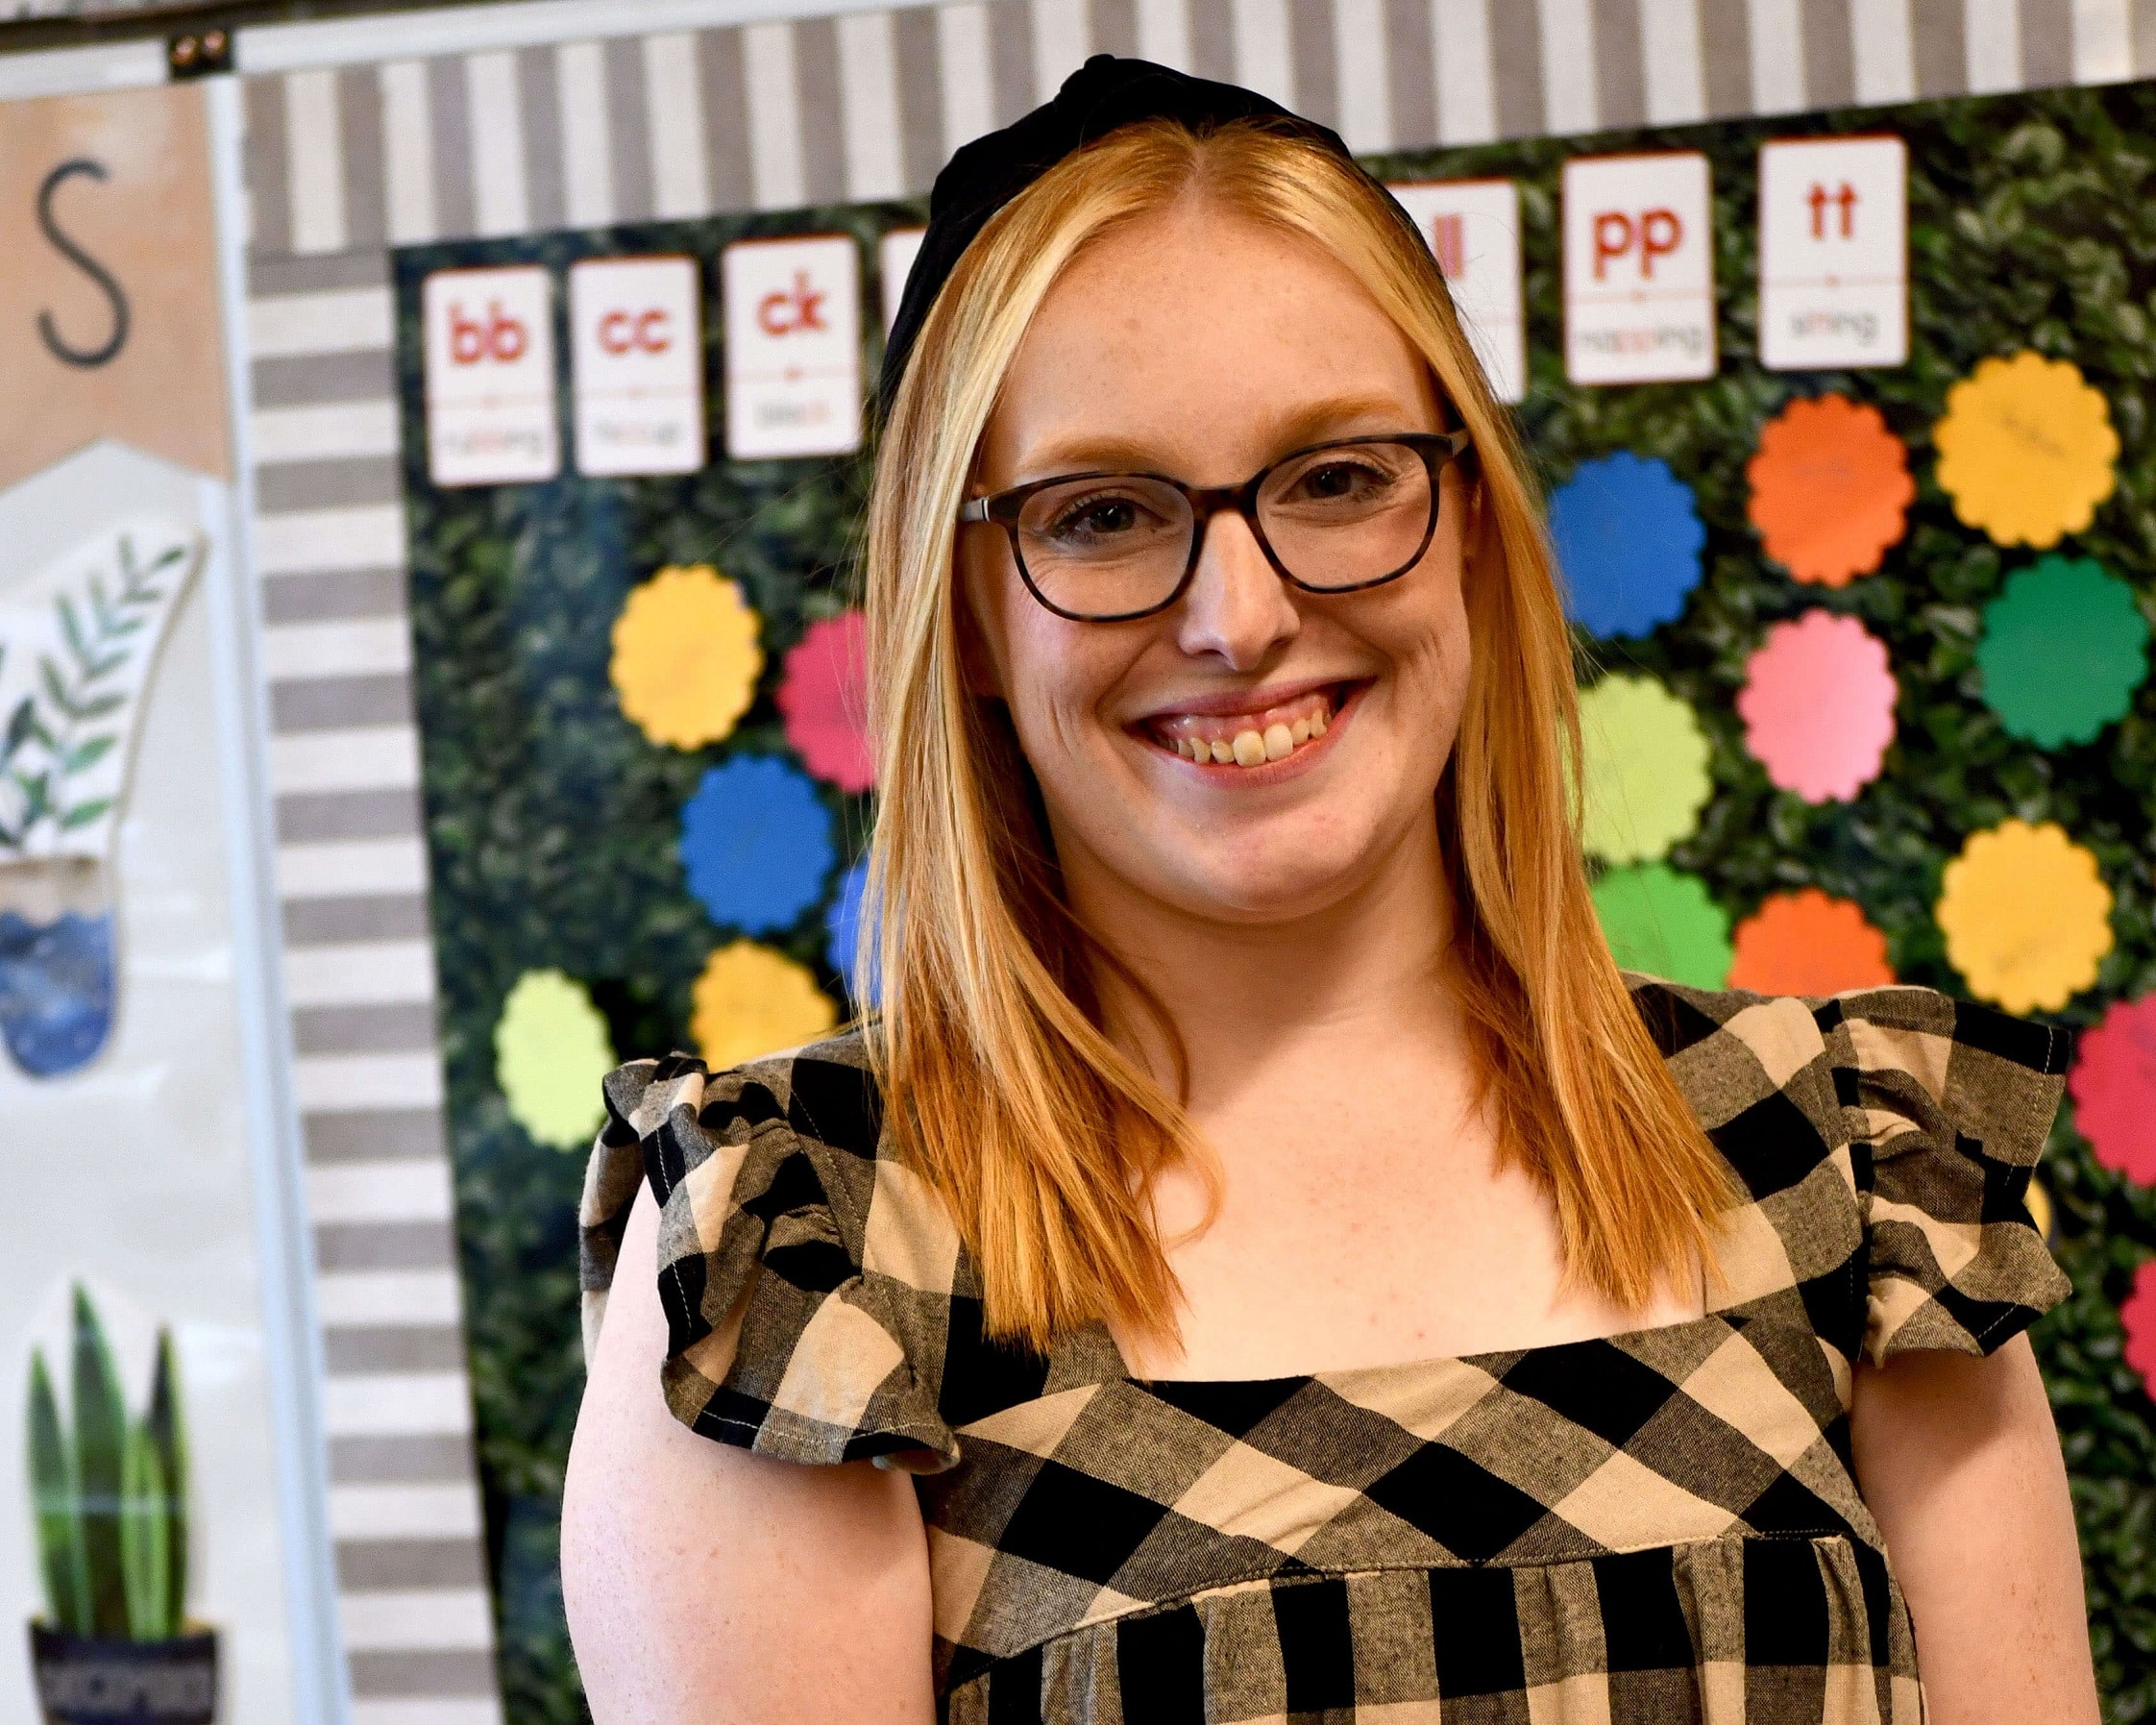 A girl in glasses smiles in front of a bulletin board.